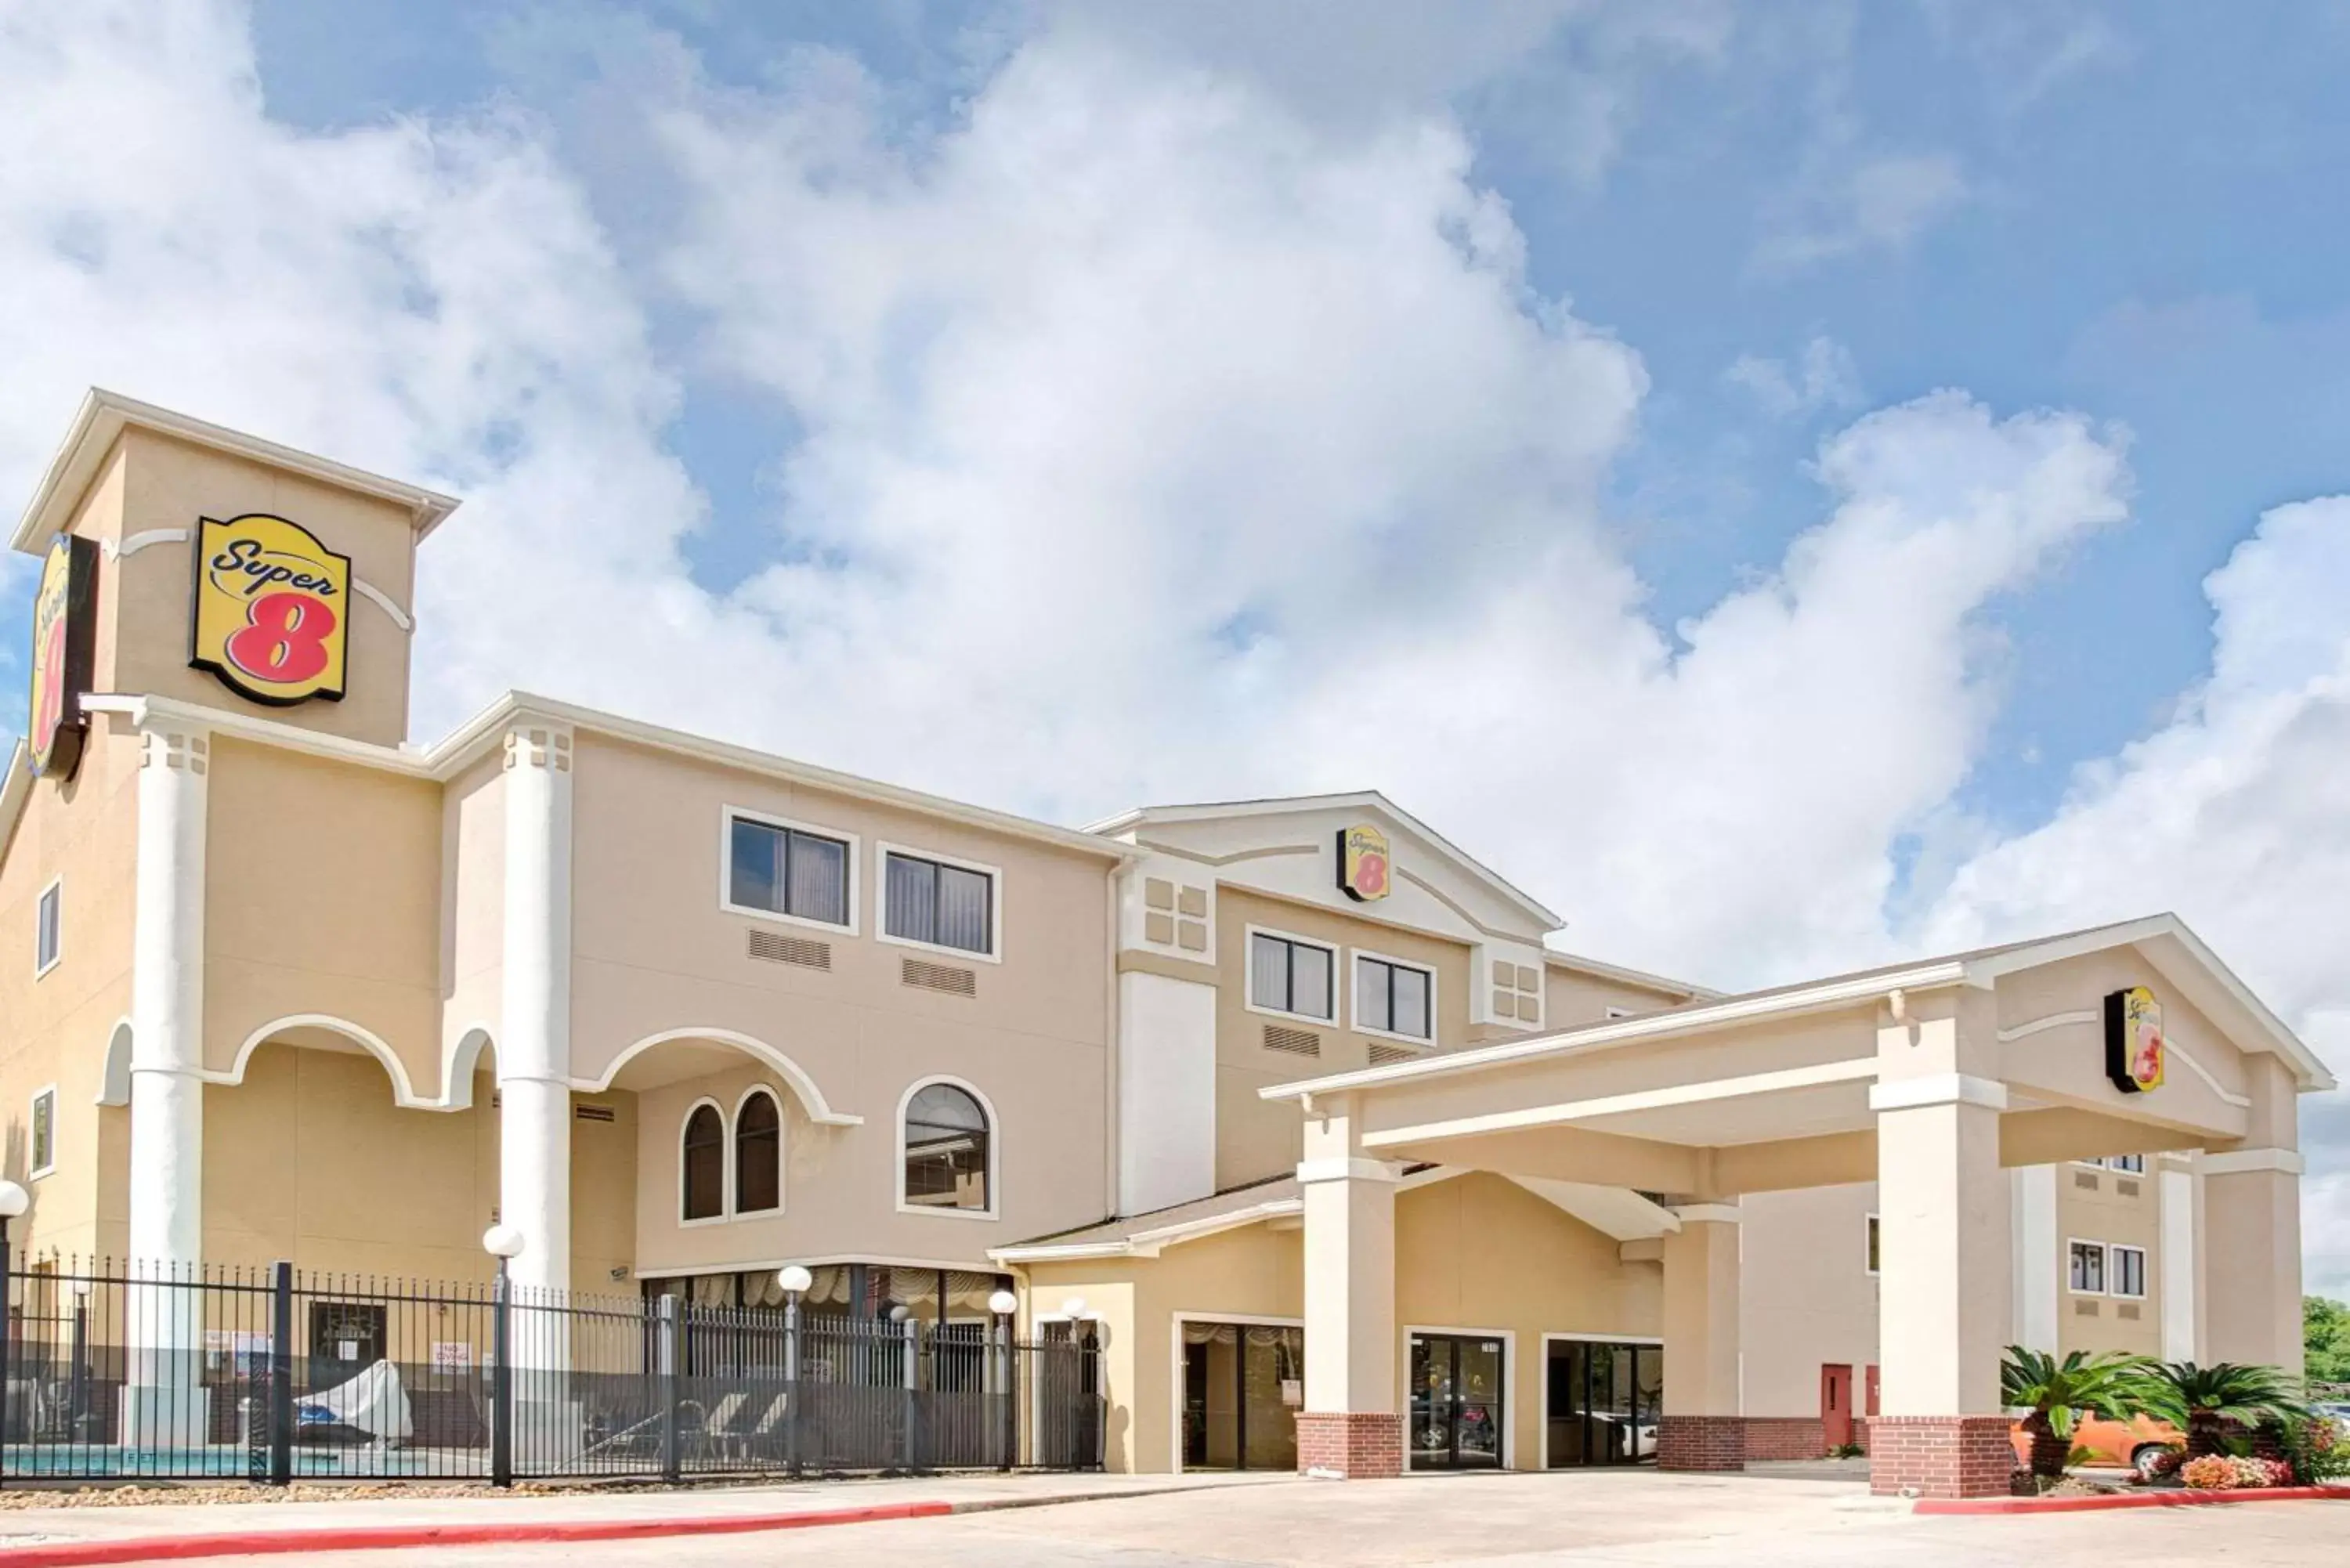 Property Building in Super 8 by Wyndham Intercontinental Houston TX